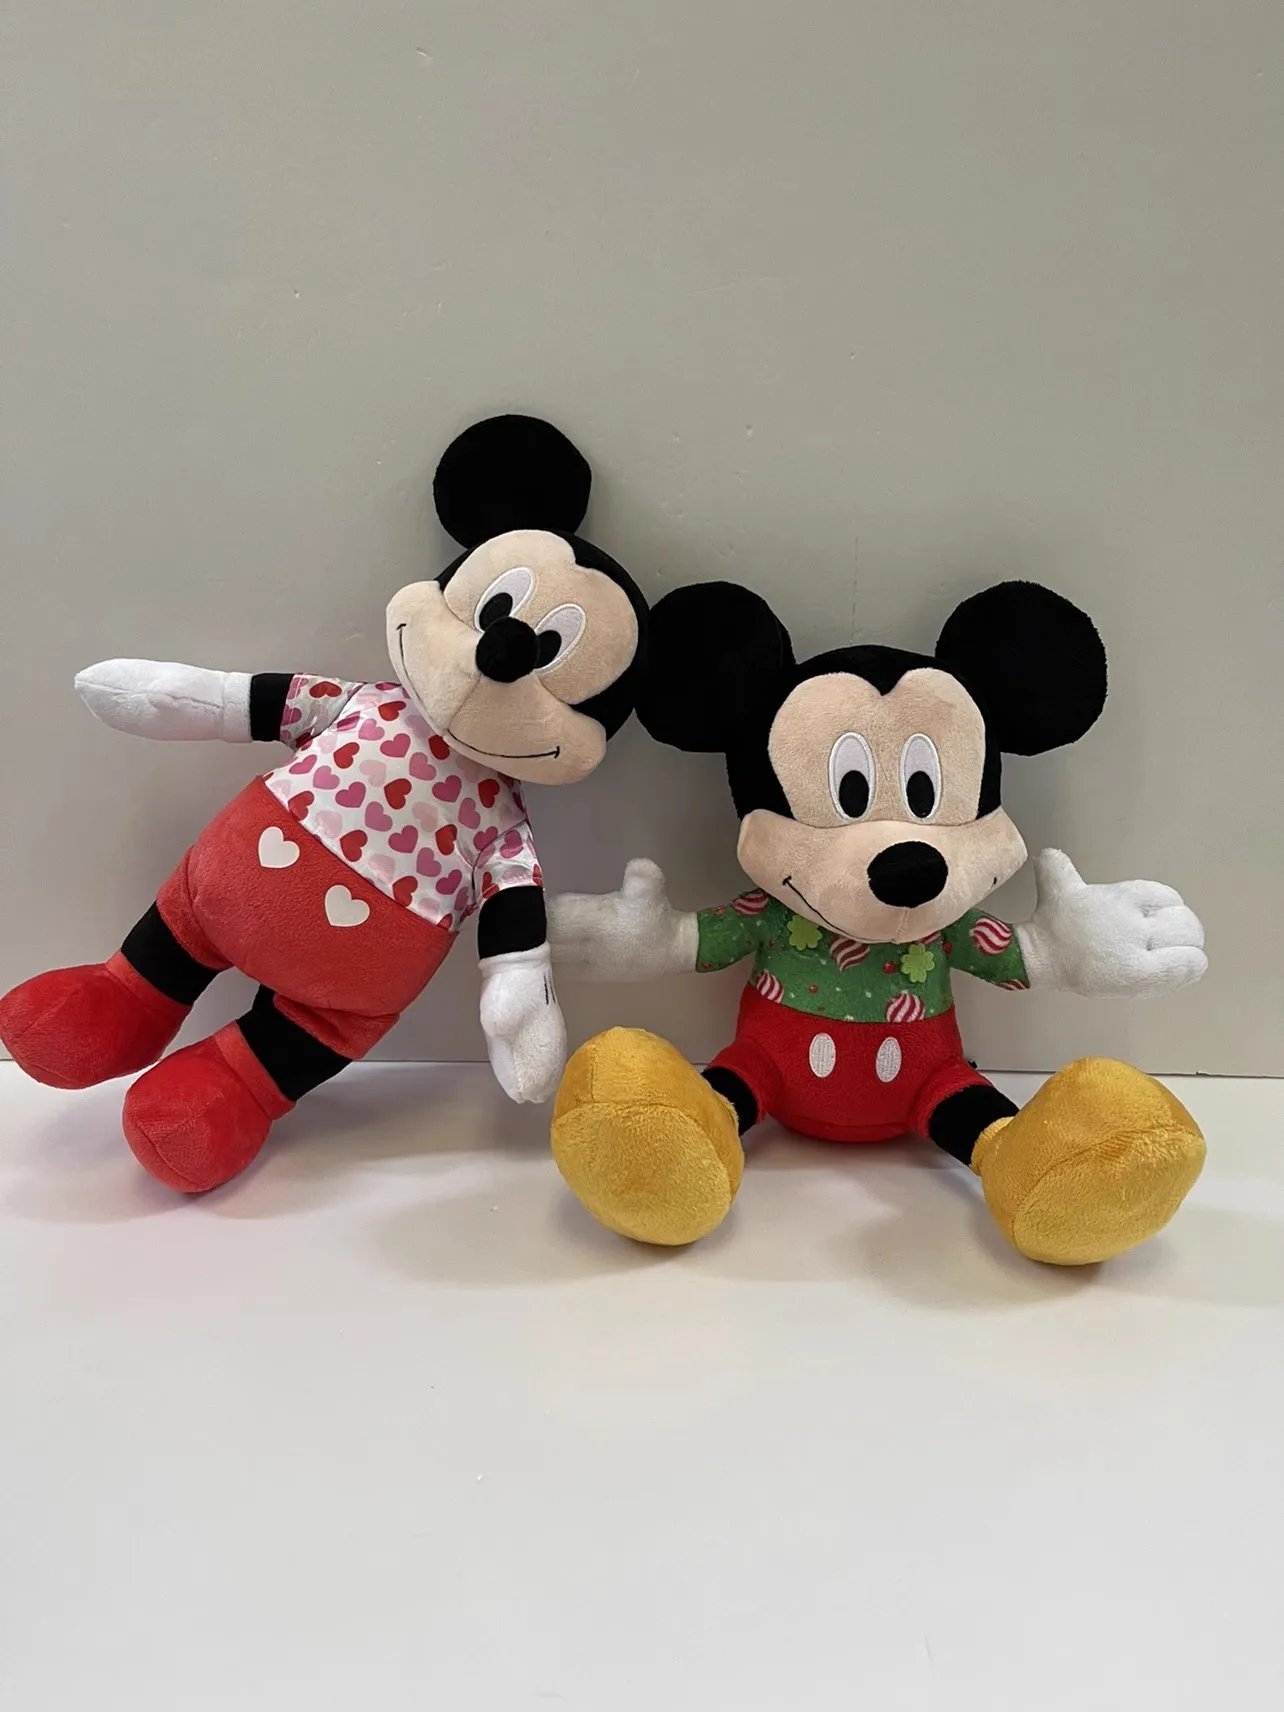 

The 30cm Mickey Mouse Plush Doll a Classic Character From Disney Is an Ideal Birthday Gift for Children